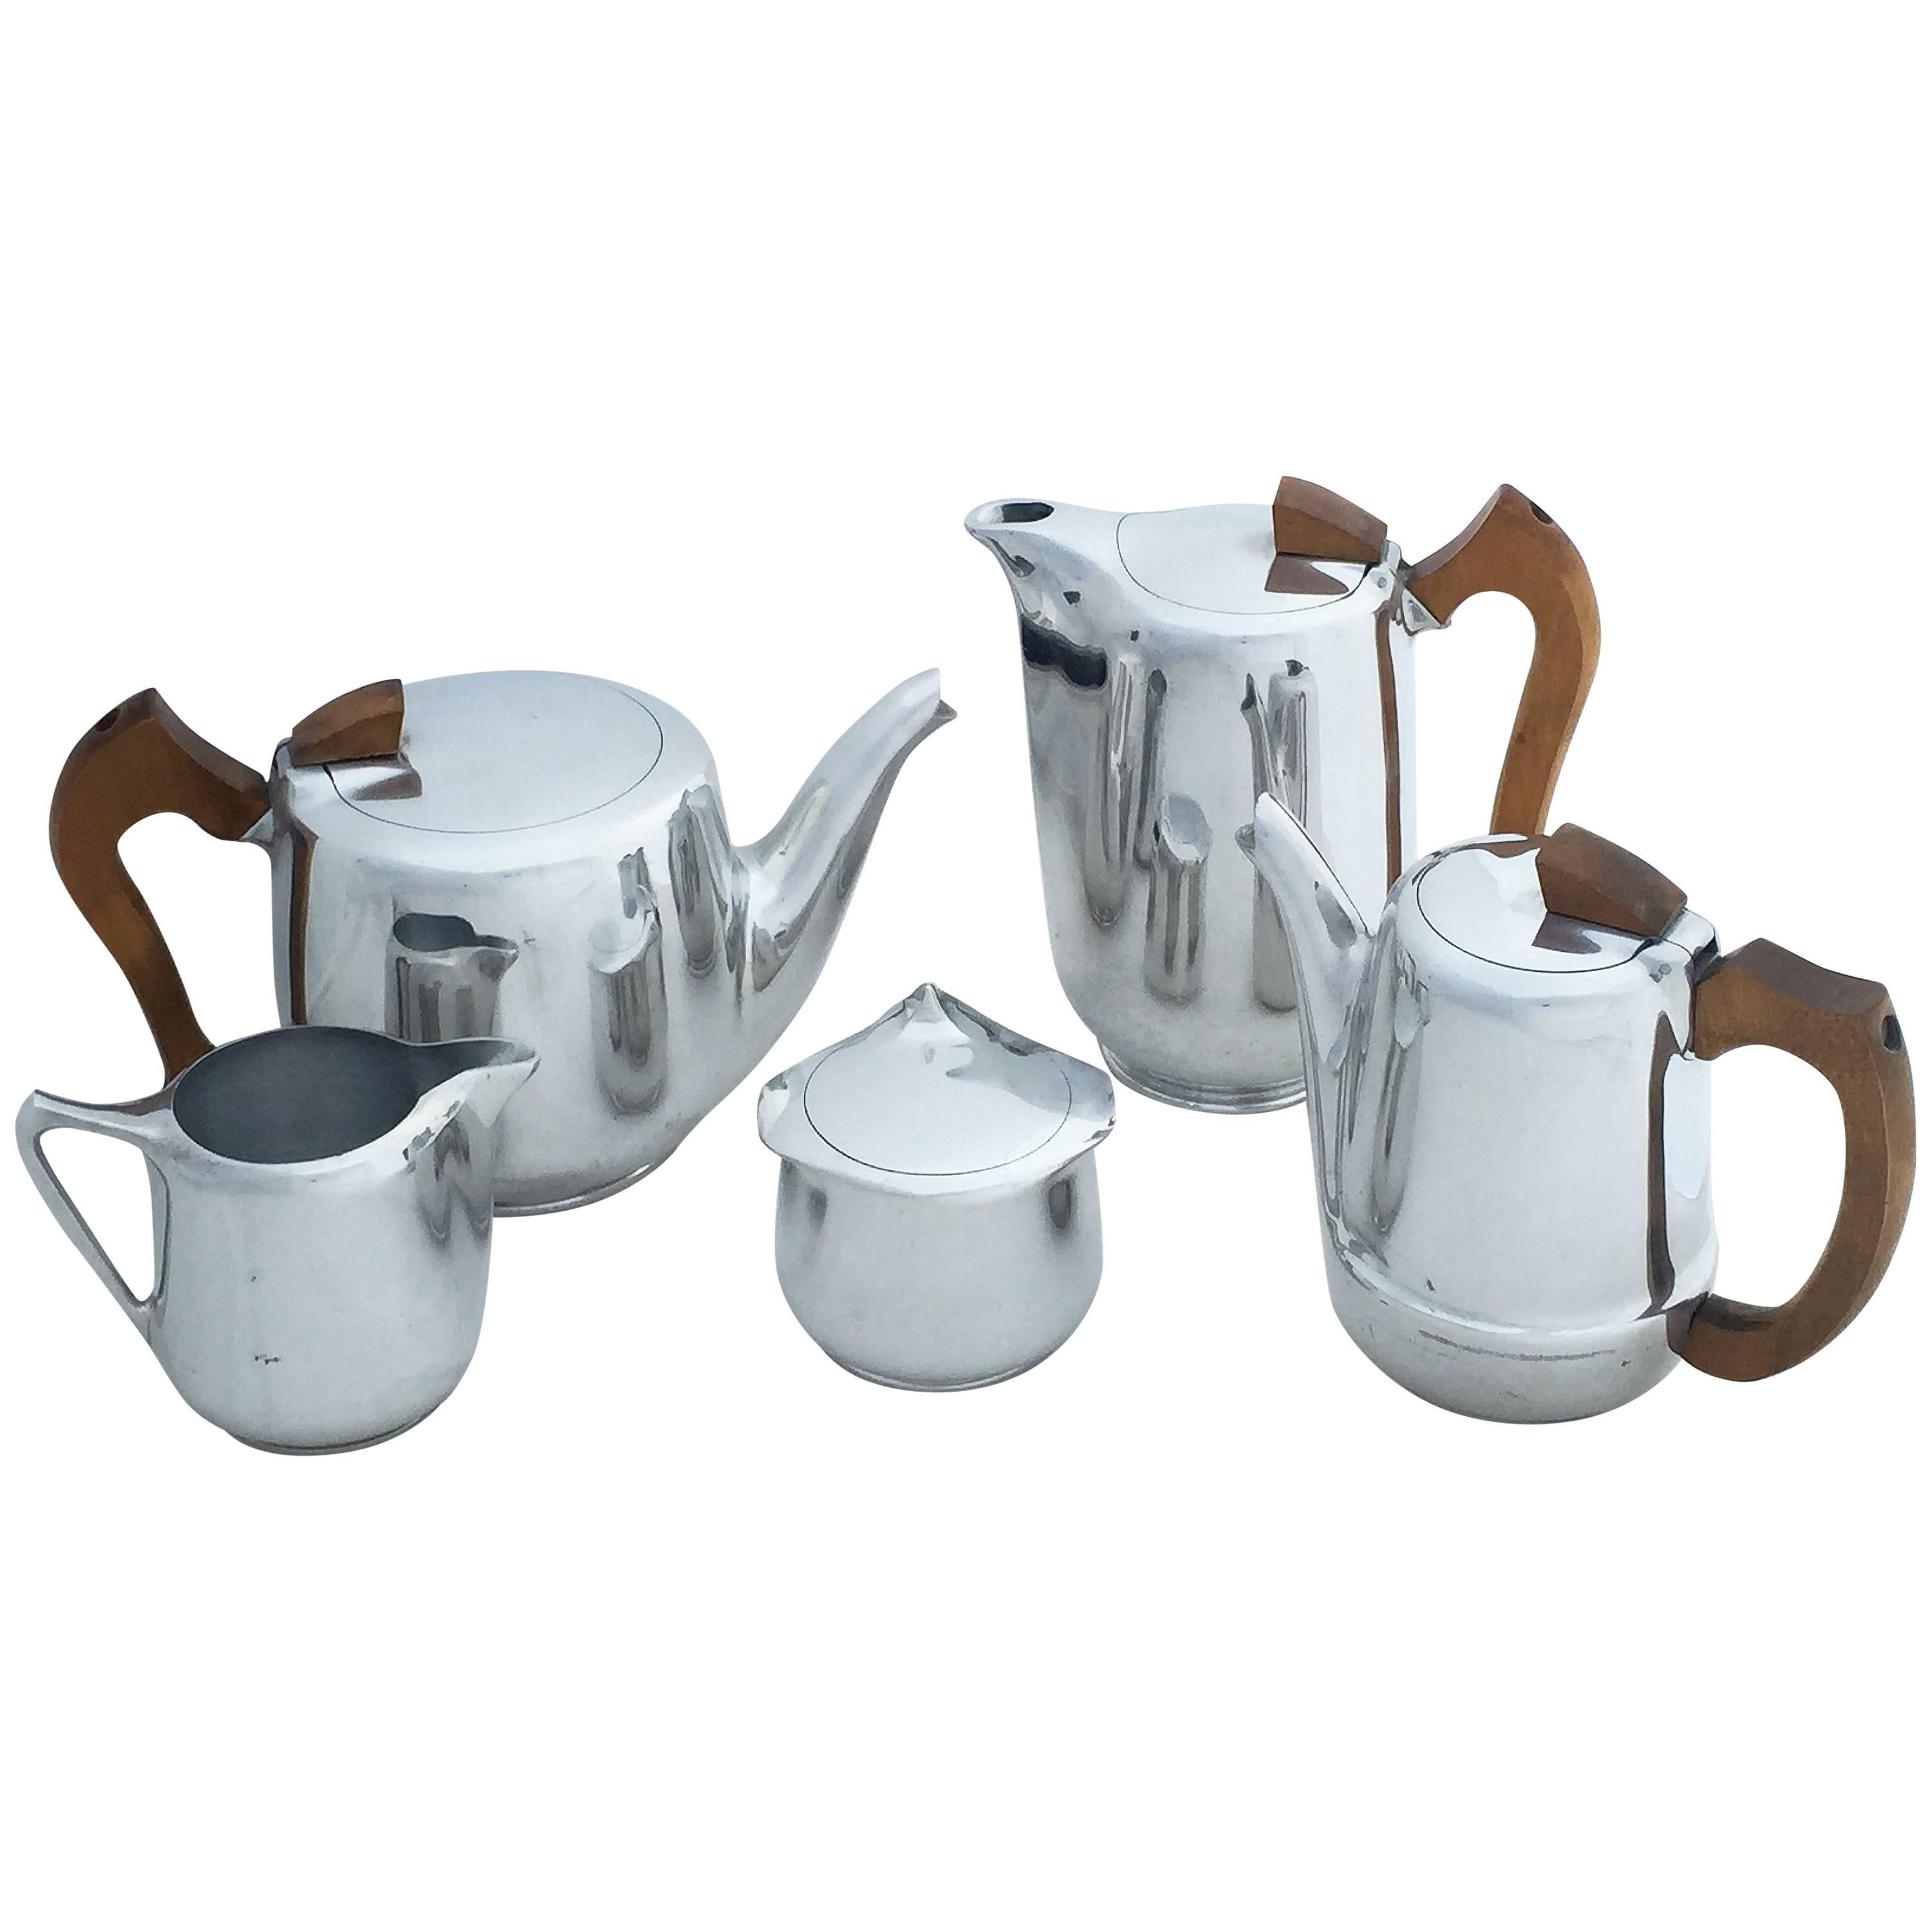 Five-Piece English Tea and Coffee Set by Picquot